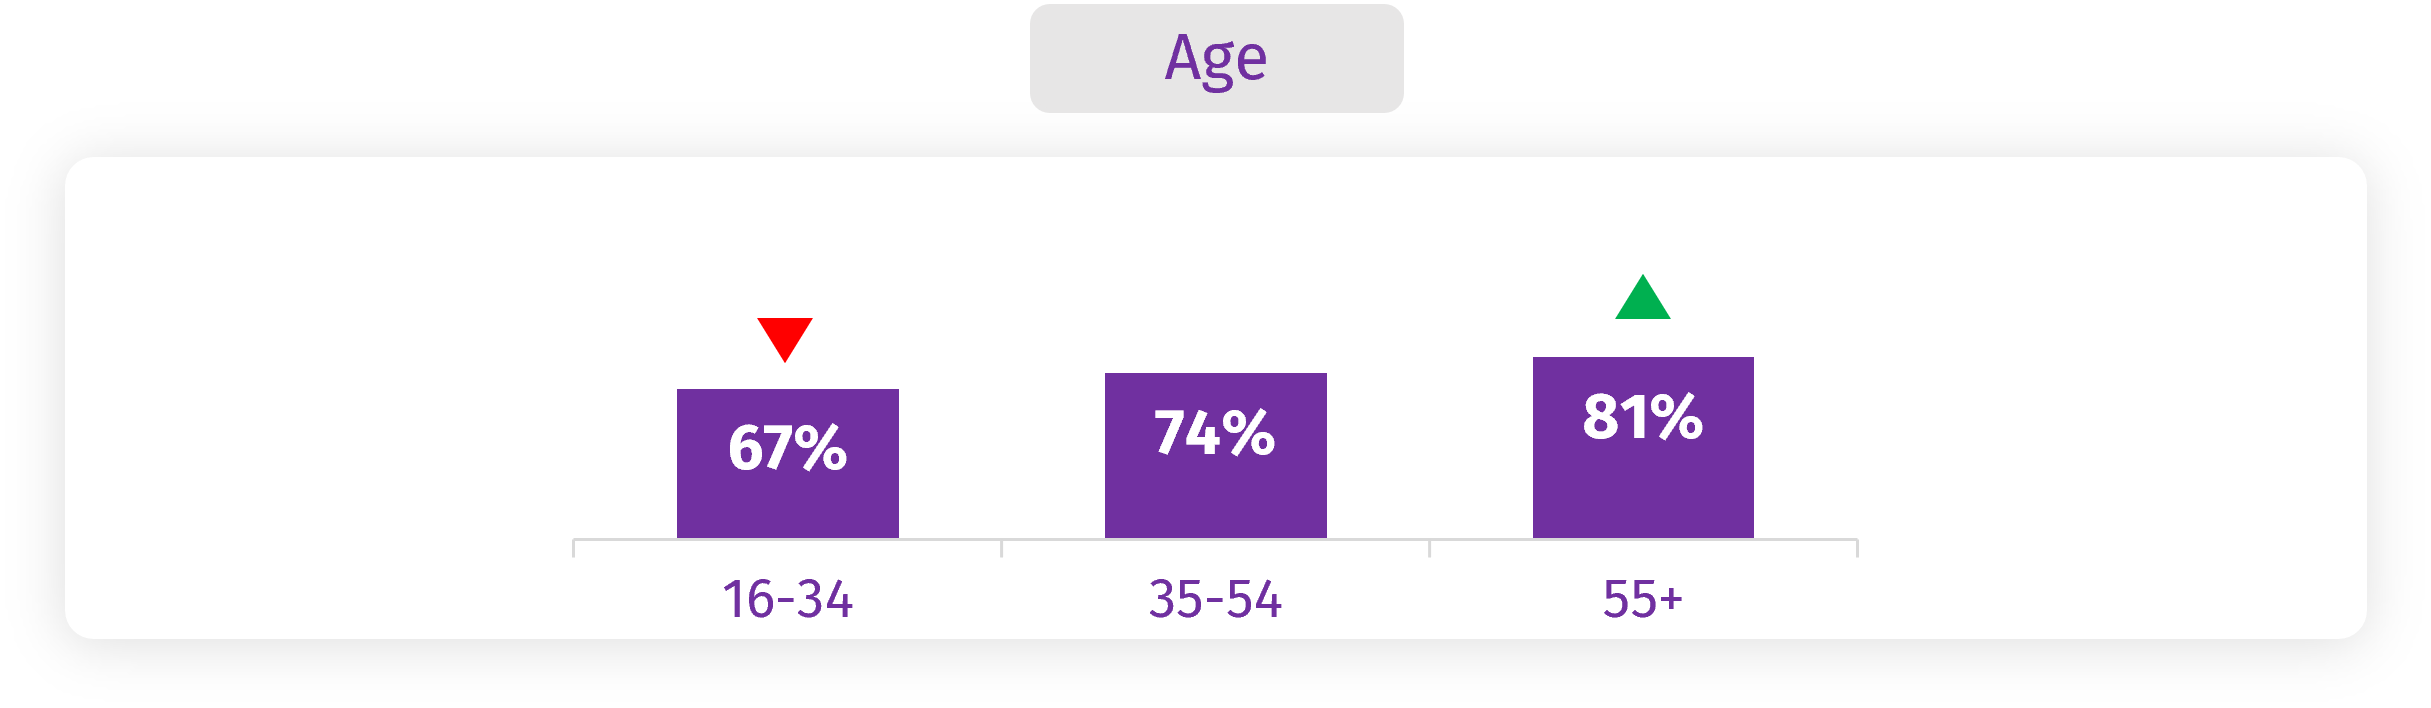 This chart shows that those aged 55+ are the most likely to report concern over ultra-processed, or over-processing, of food (81% vs. 67% of 16-34s).